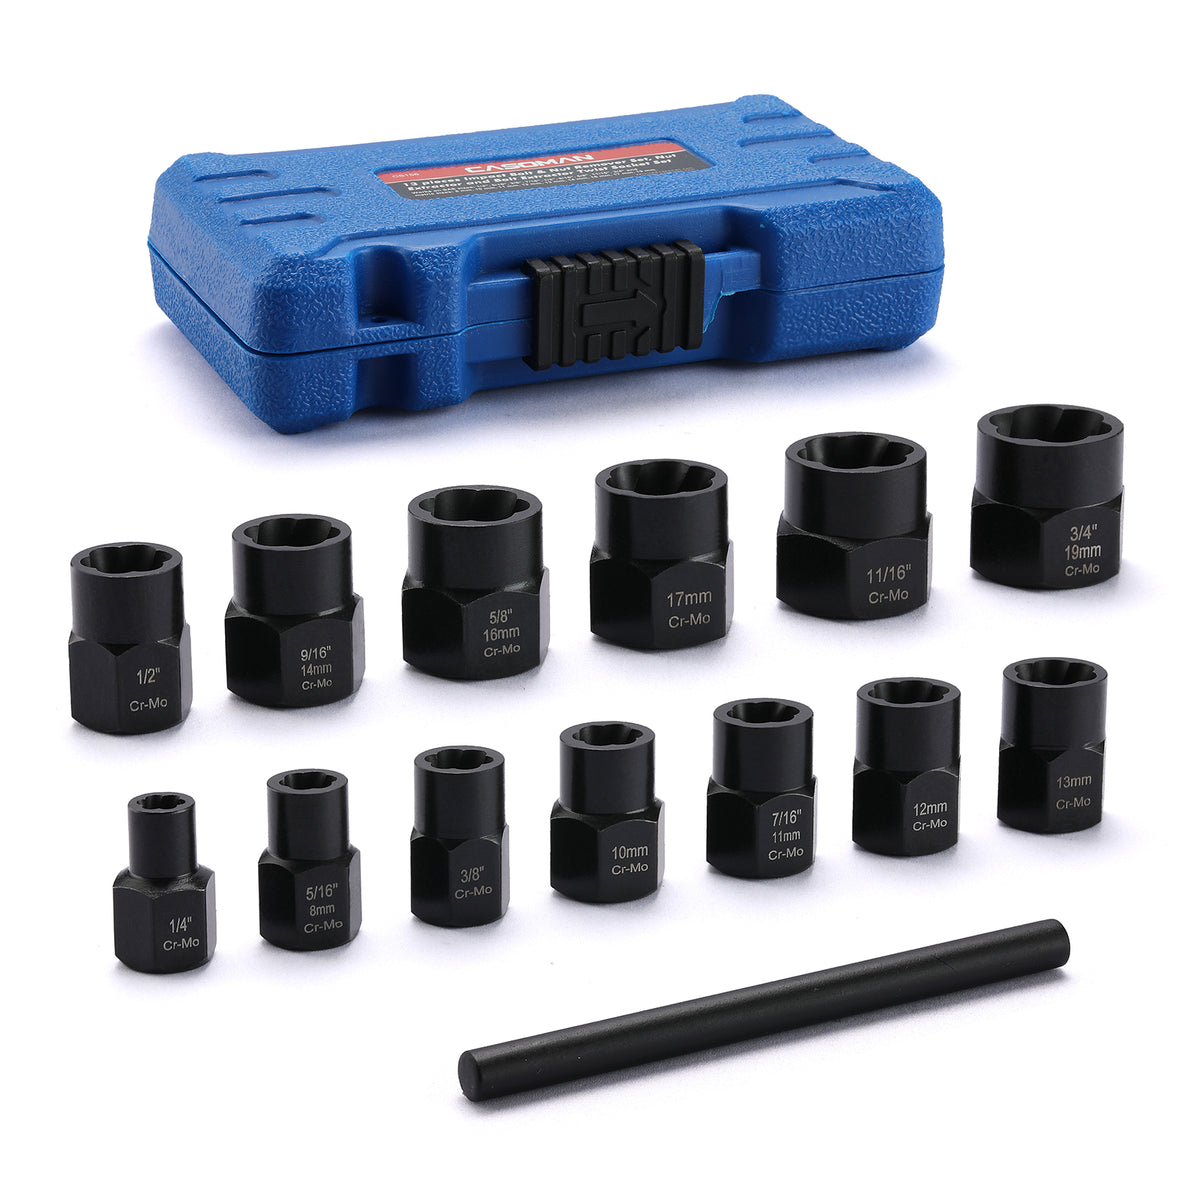 CASOMAN 13 Pieces Impact Bolt & Nut Remover Set, Nut Extractor and